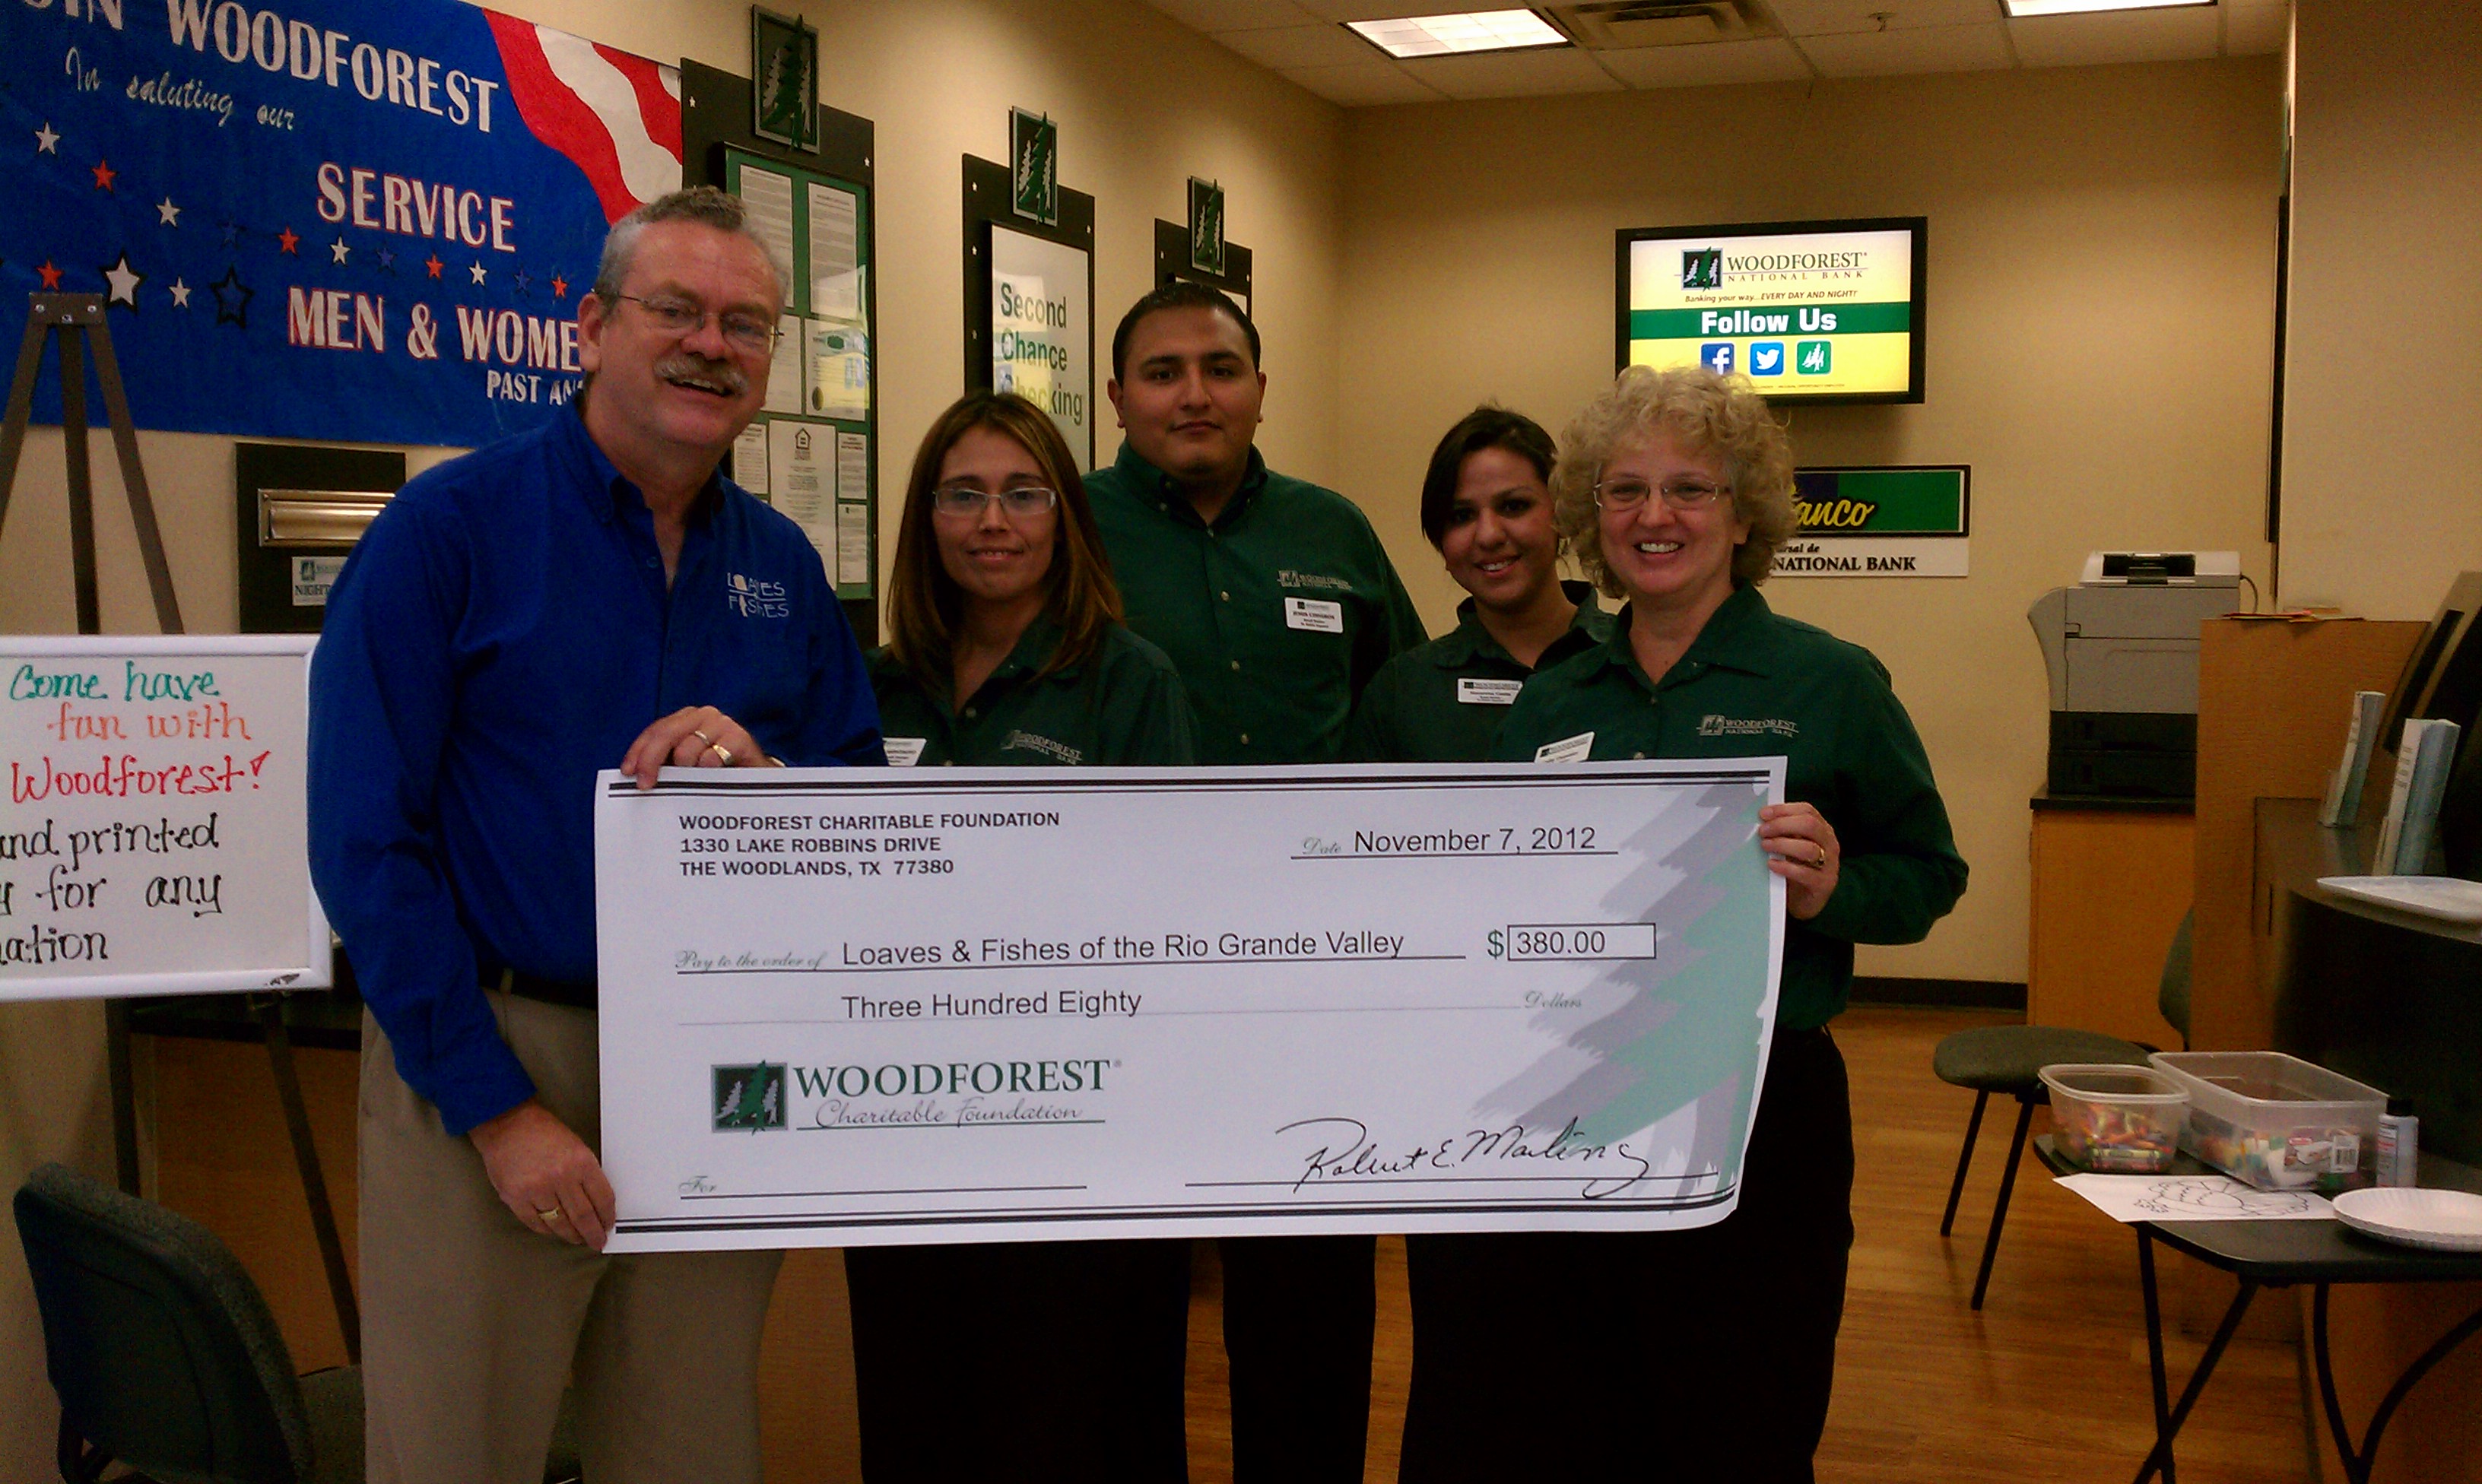 Loaves & Fishes of the Rio Grande Valley receives $380 donation from WCF.